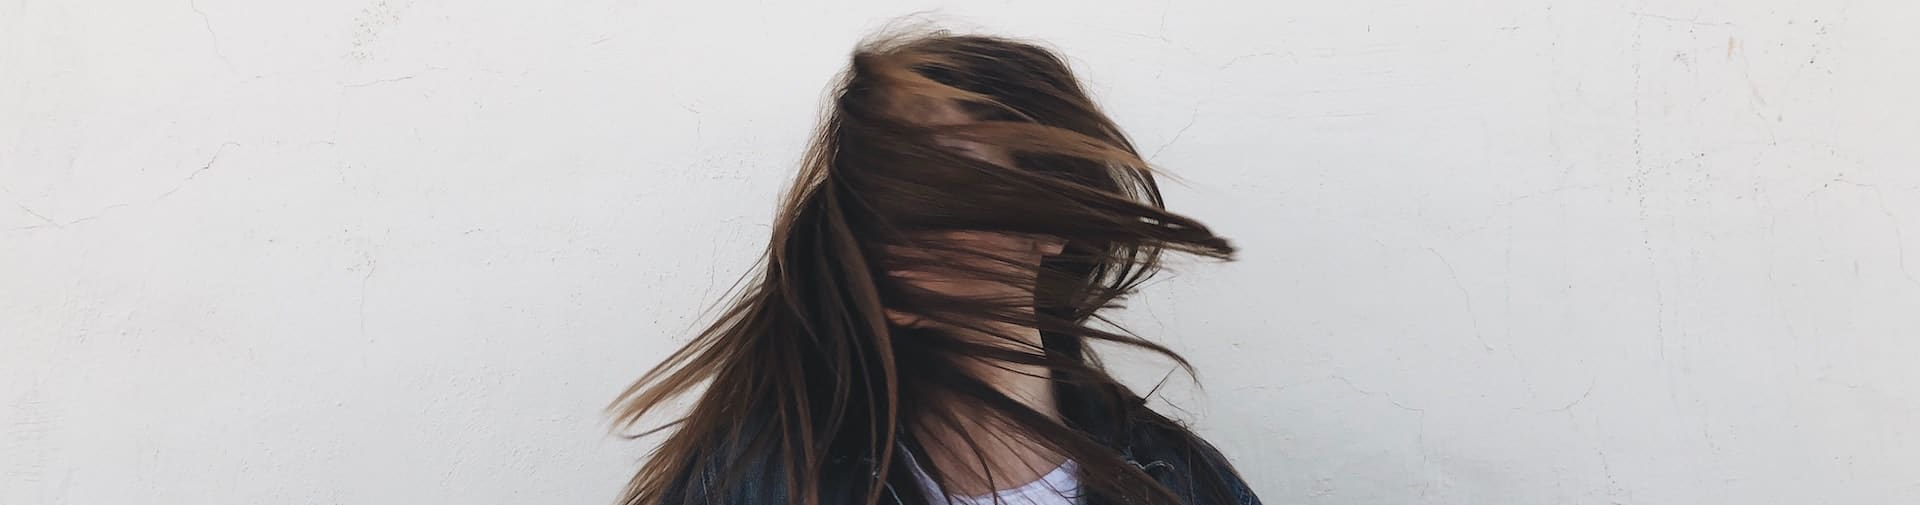 woman flinging her hair, how psychedelics can help treat anxiety